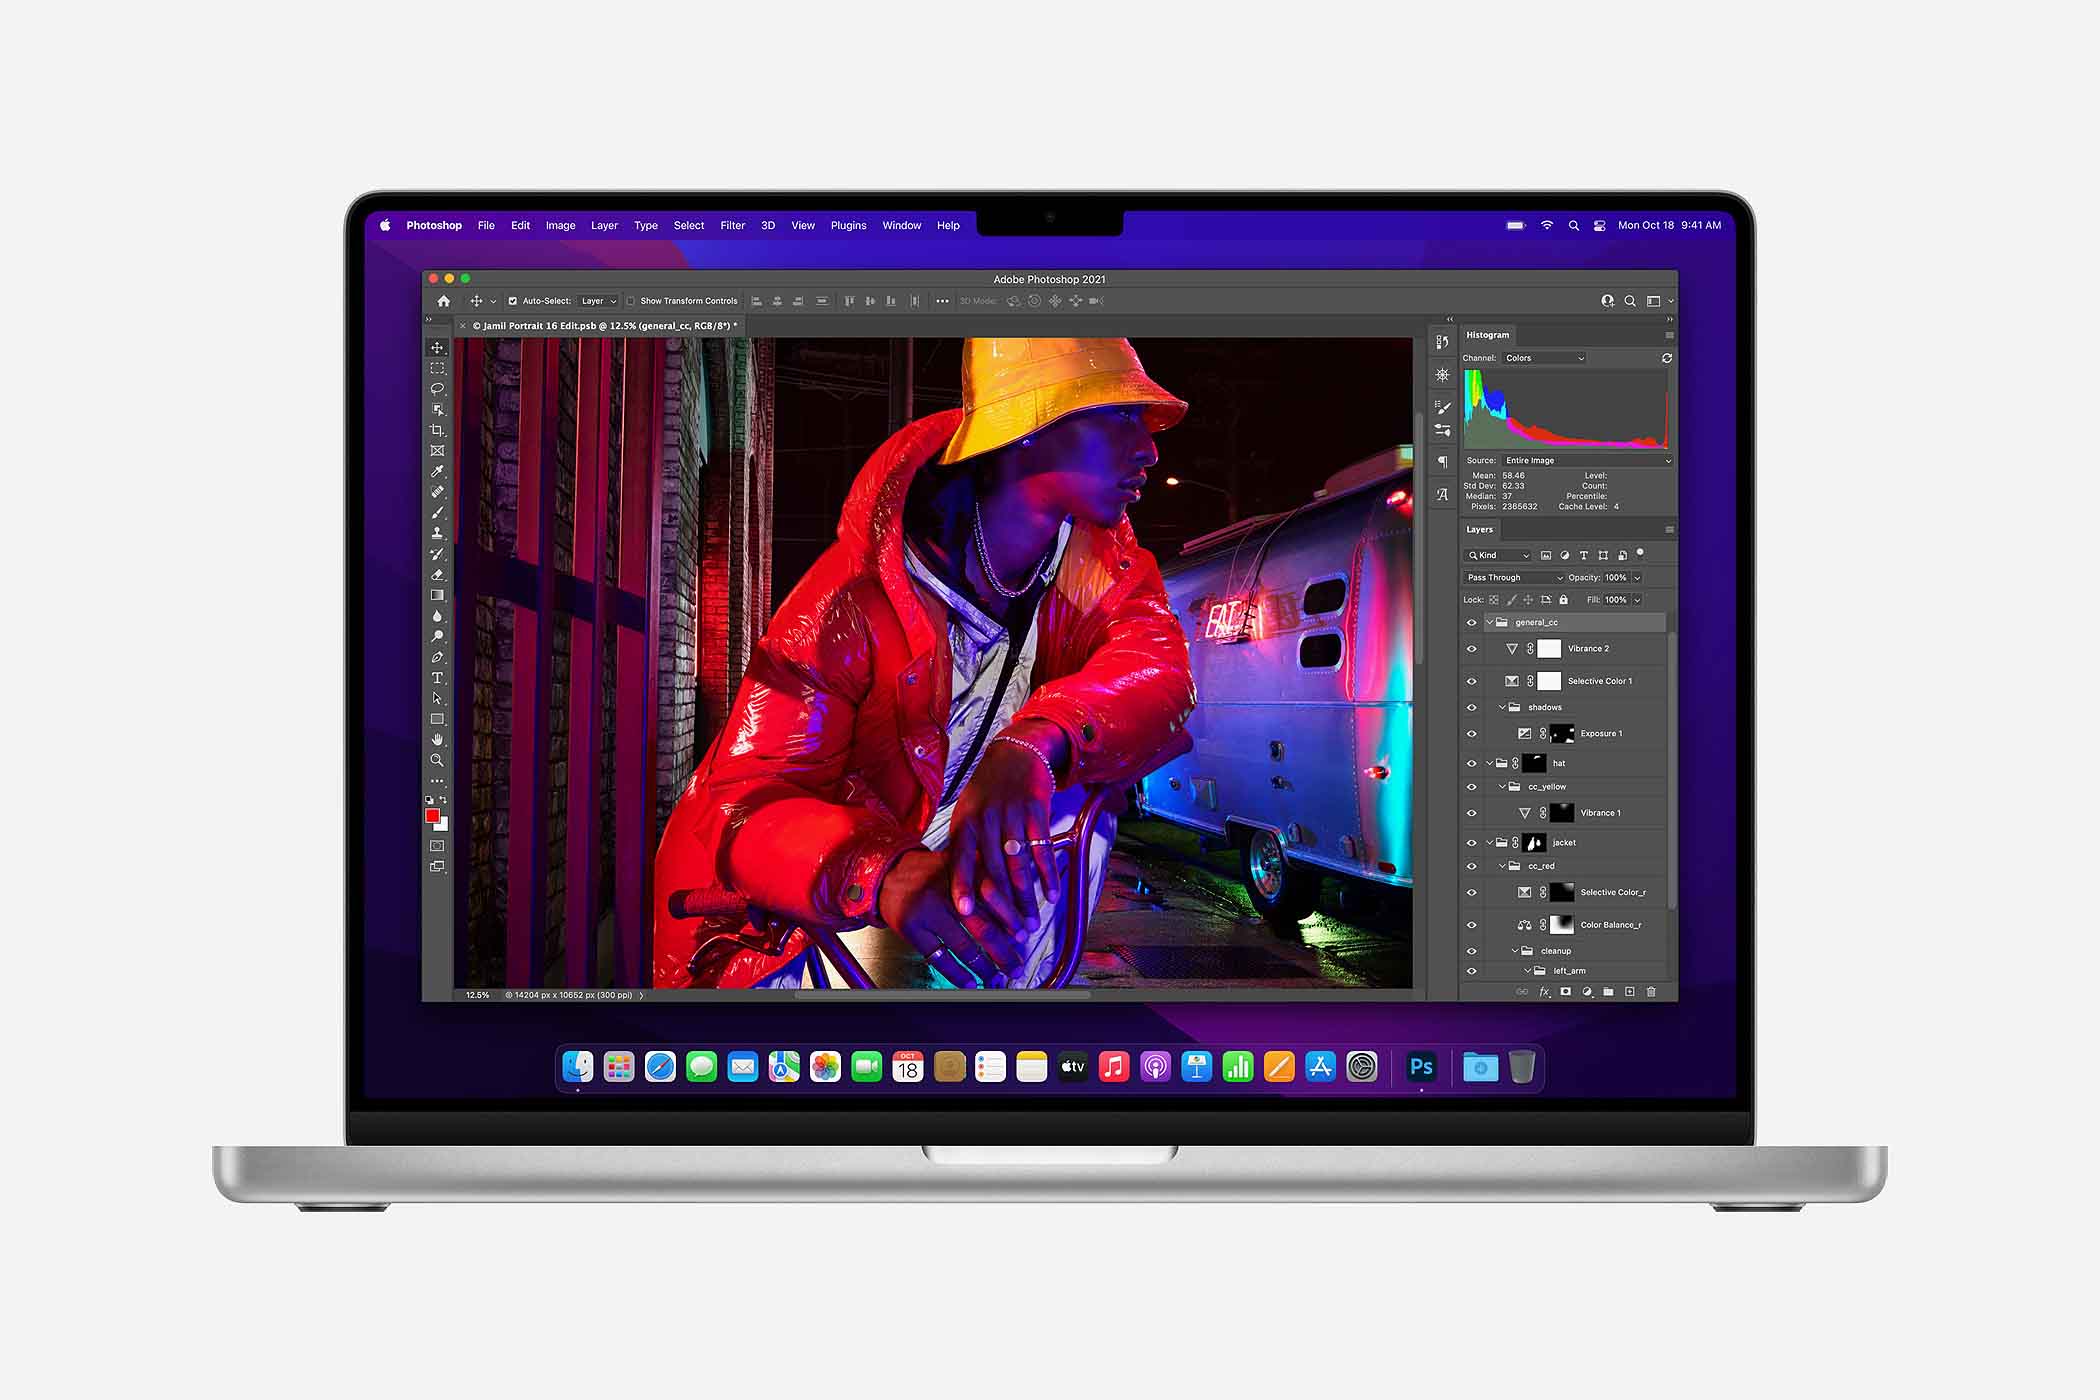 A new MacBook Pro, featuring a Liquid Retina XDR display, was announced on Tuesday